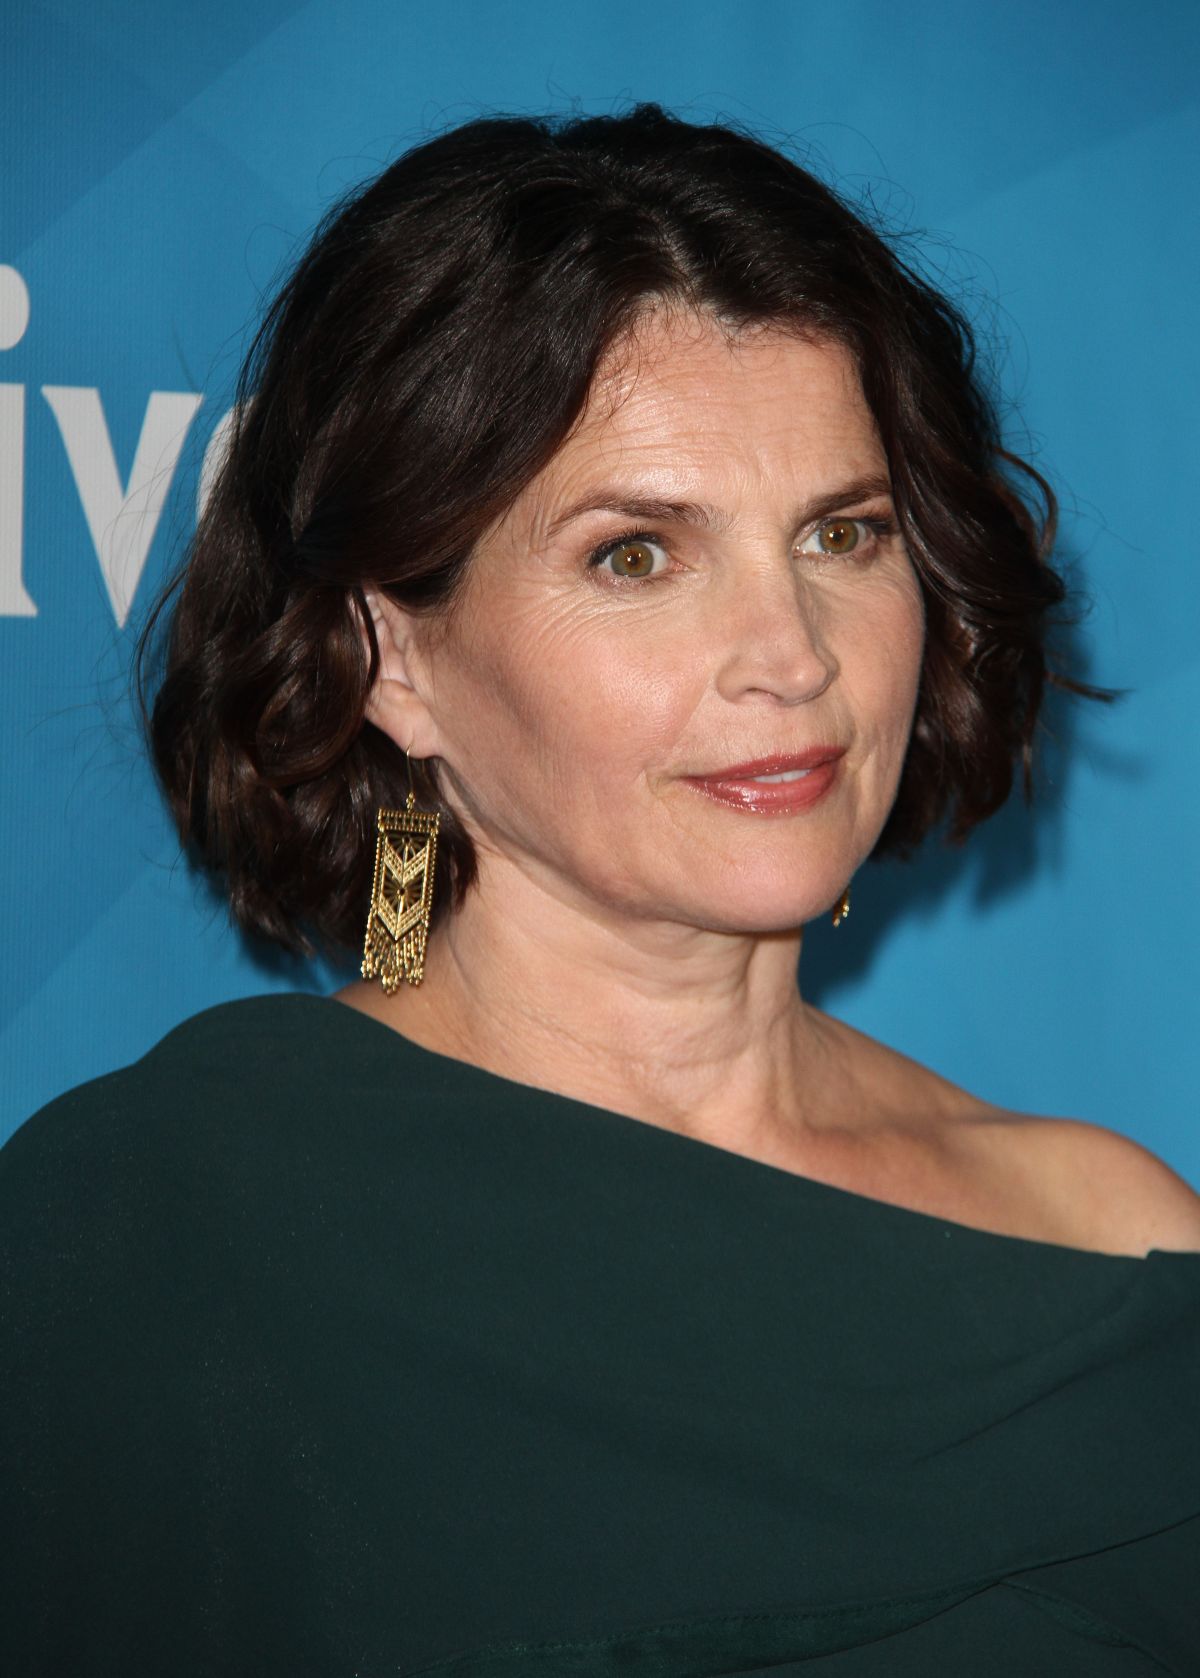 Julia Ormond At Nbc Universal Press Day At 2016 Summer Tca Tour In Beverly Hills 08 02 2016 13 